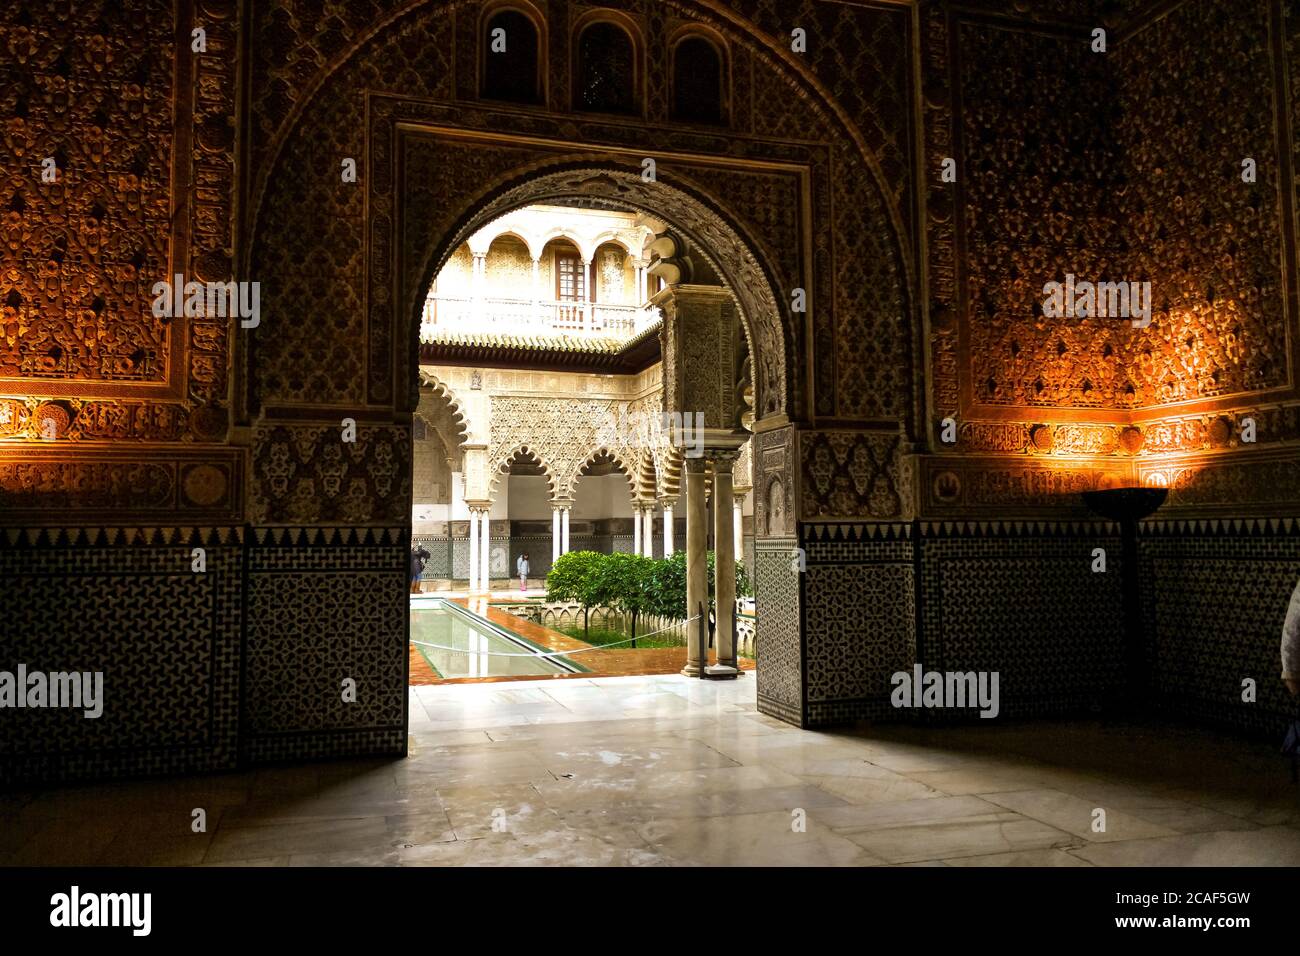 Seville, Spain: Moorish architecture of beautiful castle called Real Alcazar in Seville, Andalusia, Spain Stock Photo